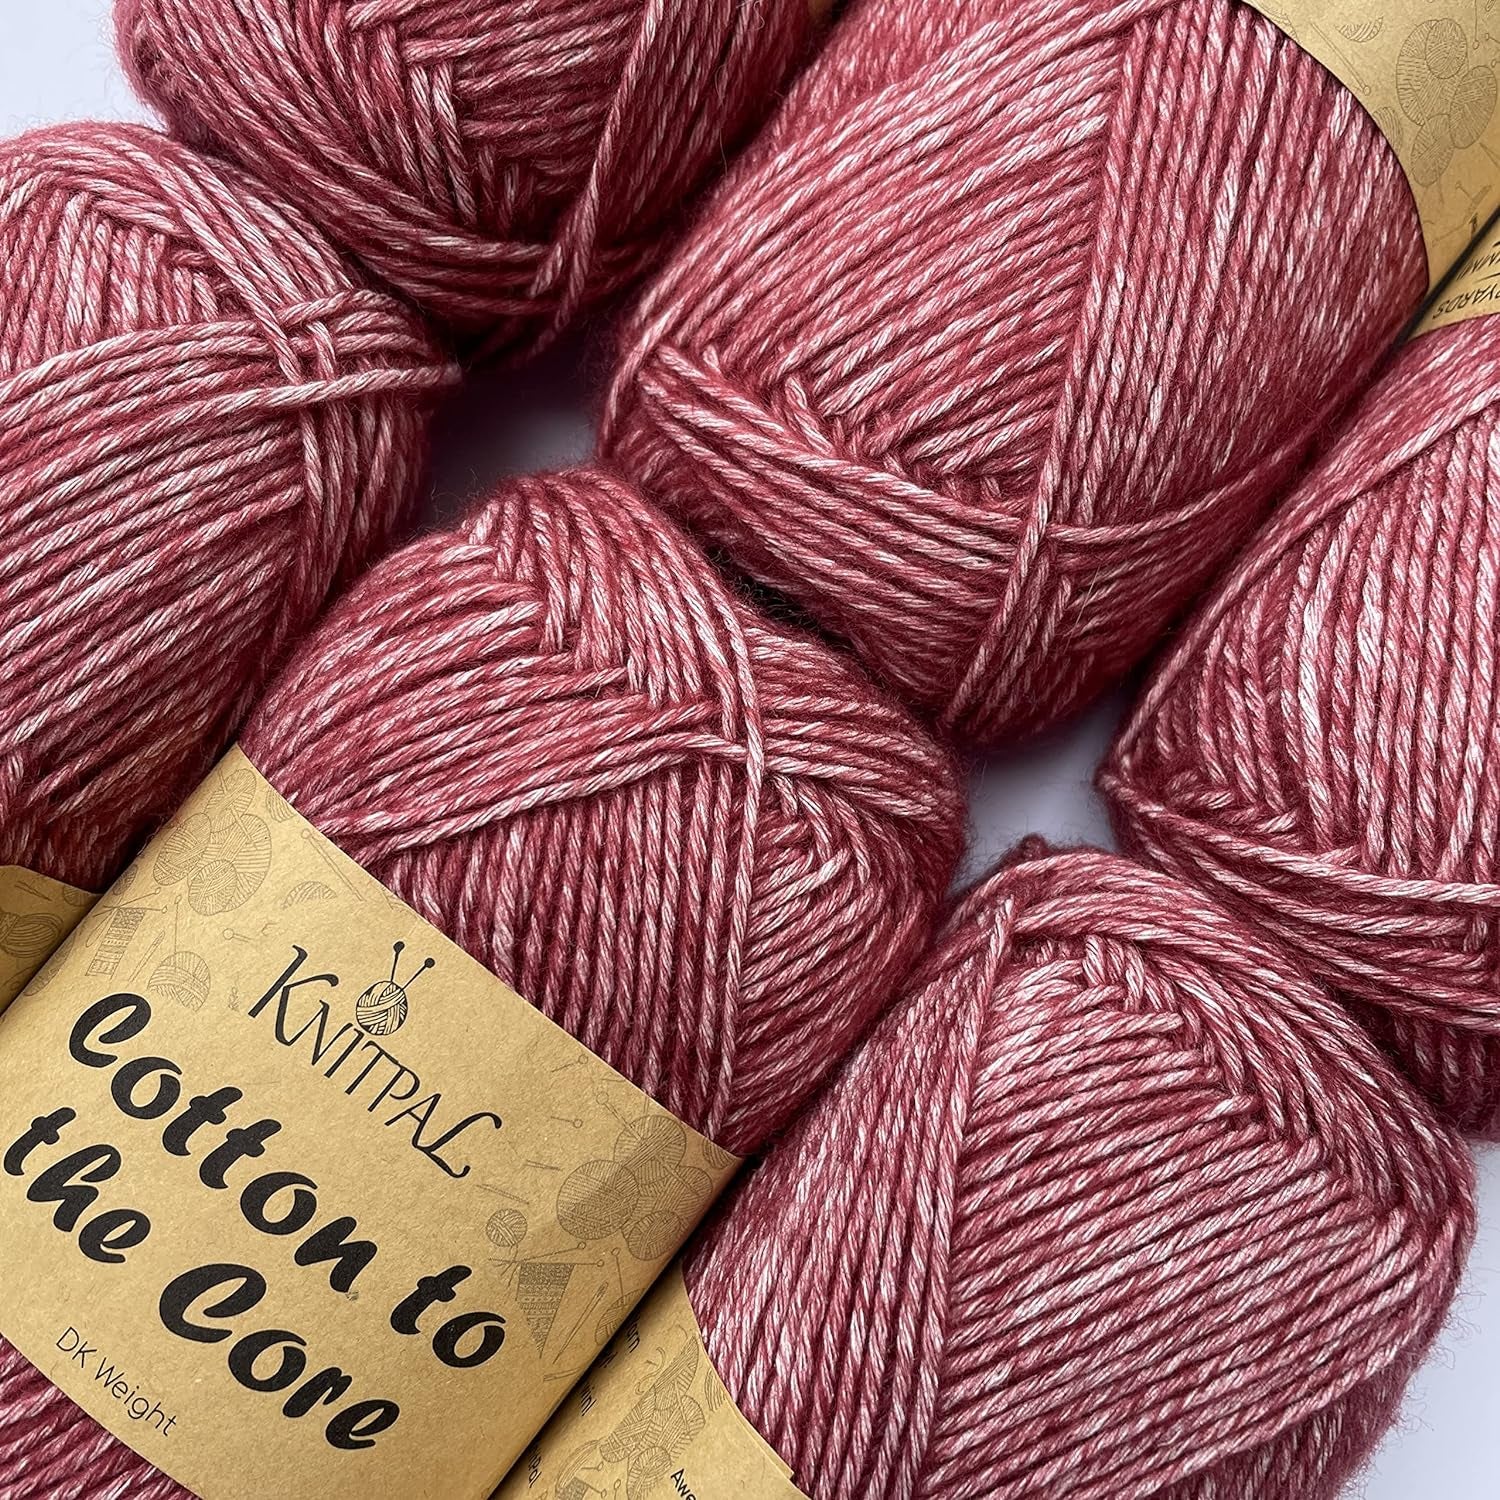 Cotton to the Core Soft Cotton Yarn for Crocheting, 78% Cotton and 22% Acrylic - Soft Baby Yarn for Crocheting - 3 DK Weight Cotton Yarn for Knitting - 6 Skeins, 852Yds/300G (Almond Tan)